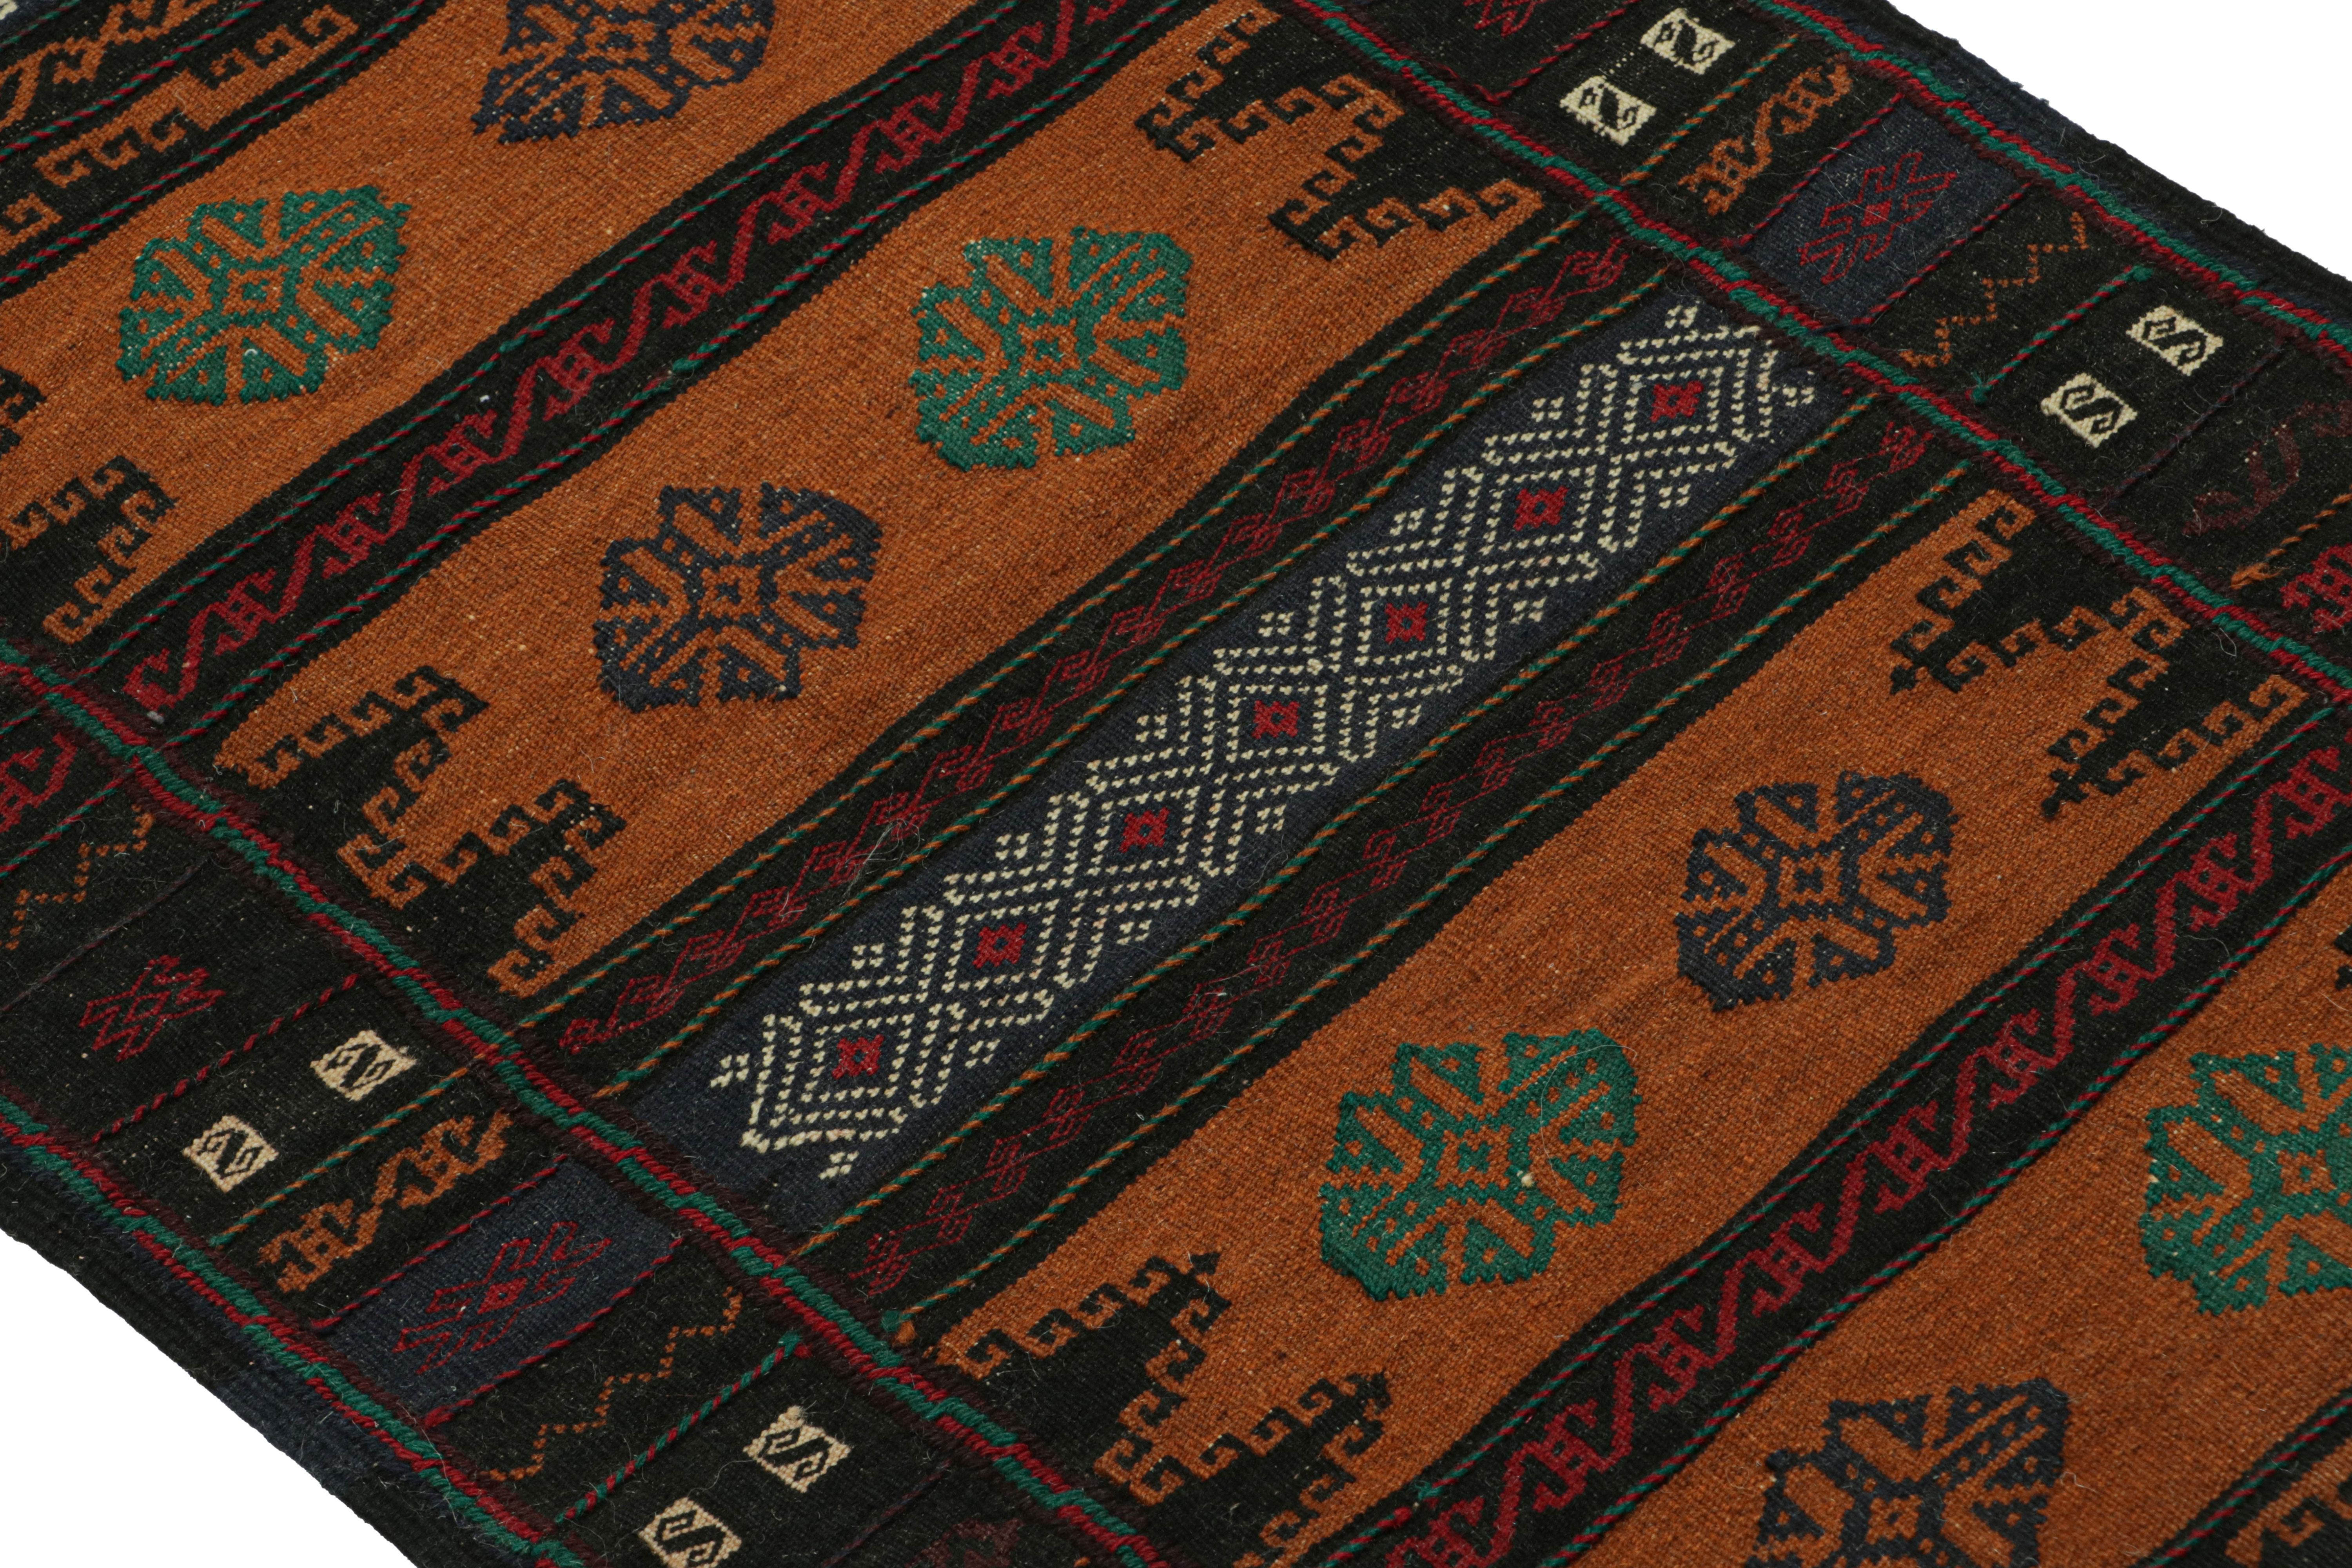 Wool Vintage Afghan Kilim with Polychromatic Geometric Patterns, from Rug & Kilim For Sale